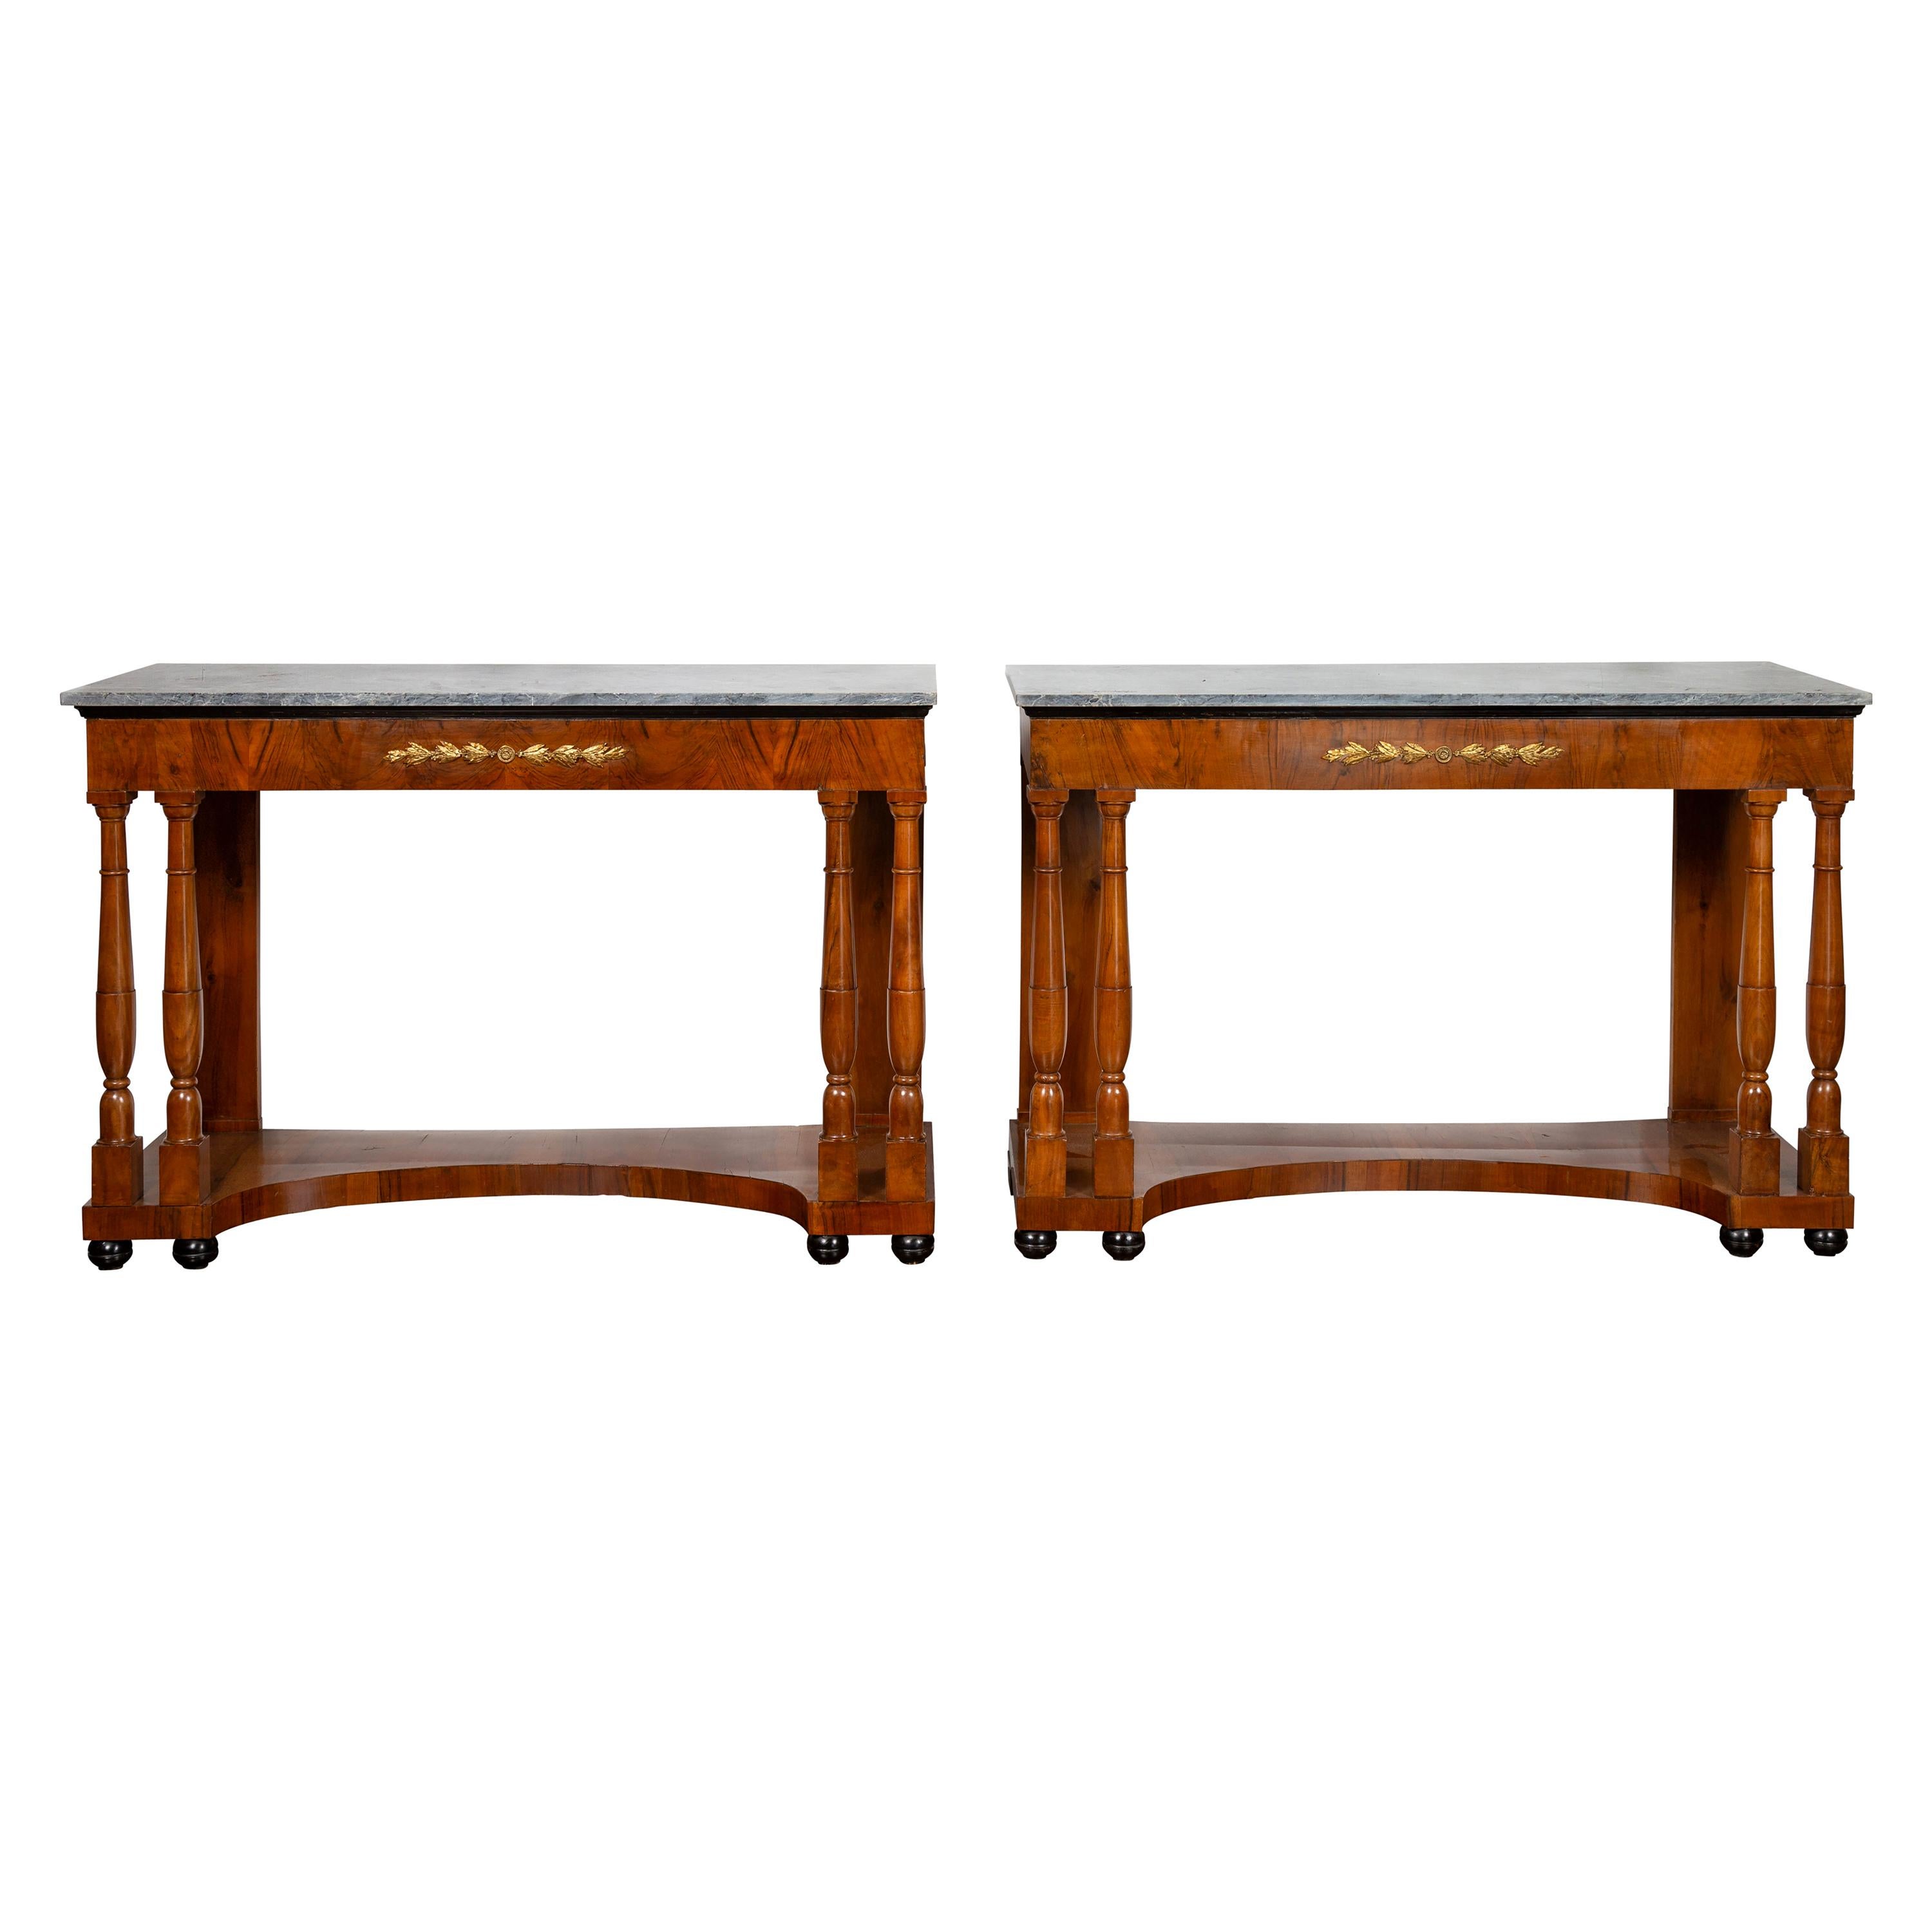 Pair of French 1860s Napoleon III Period Walnut Console Tables with Marble Tops